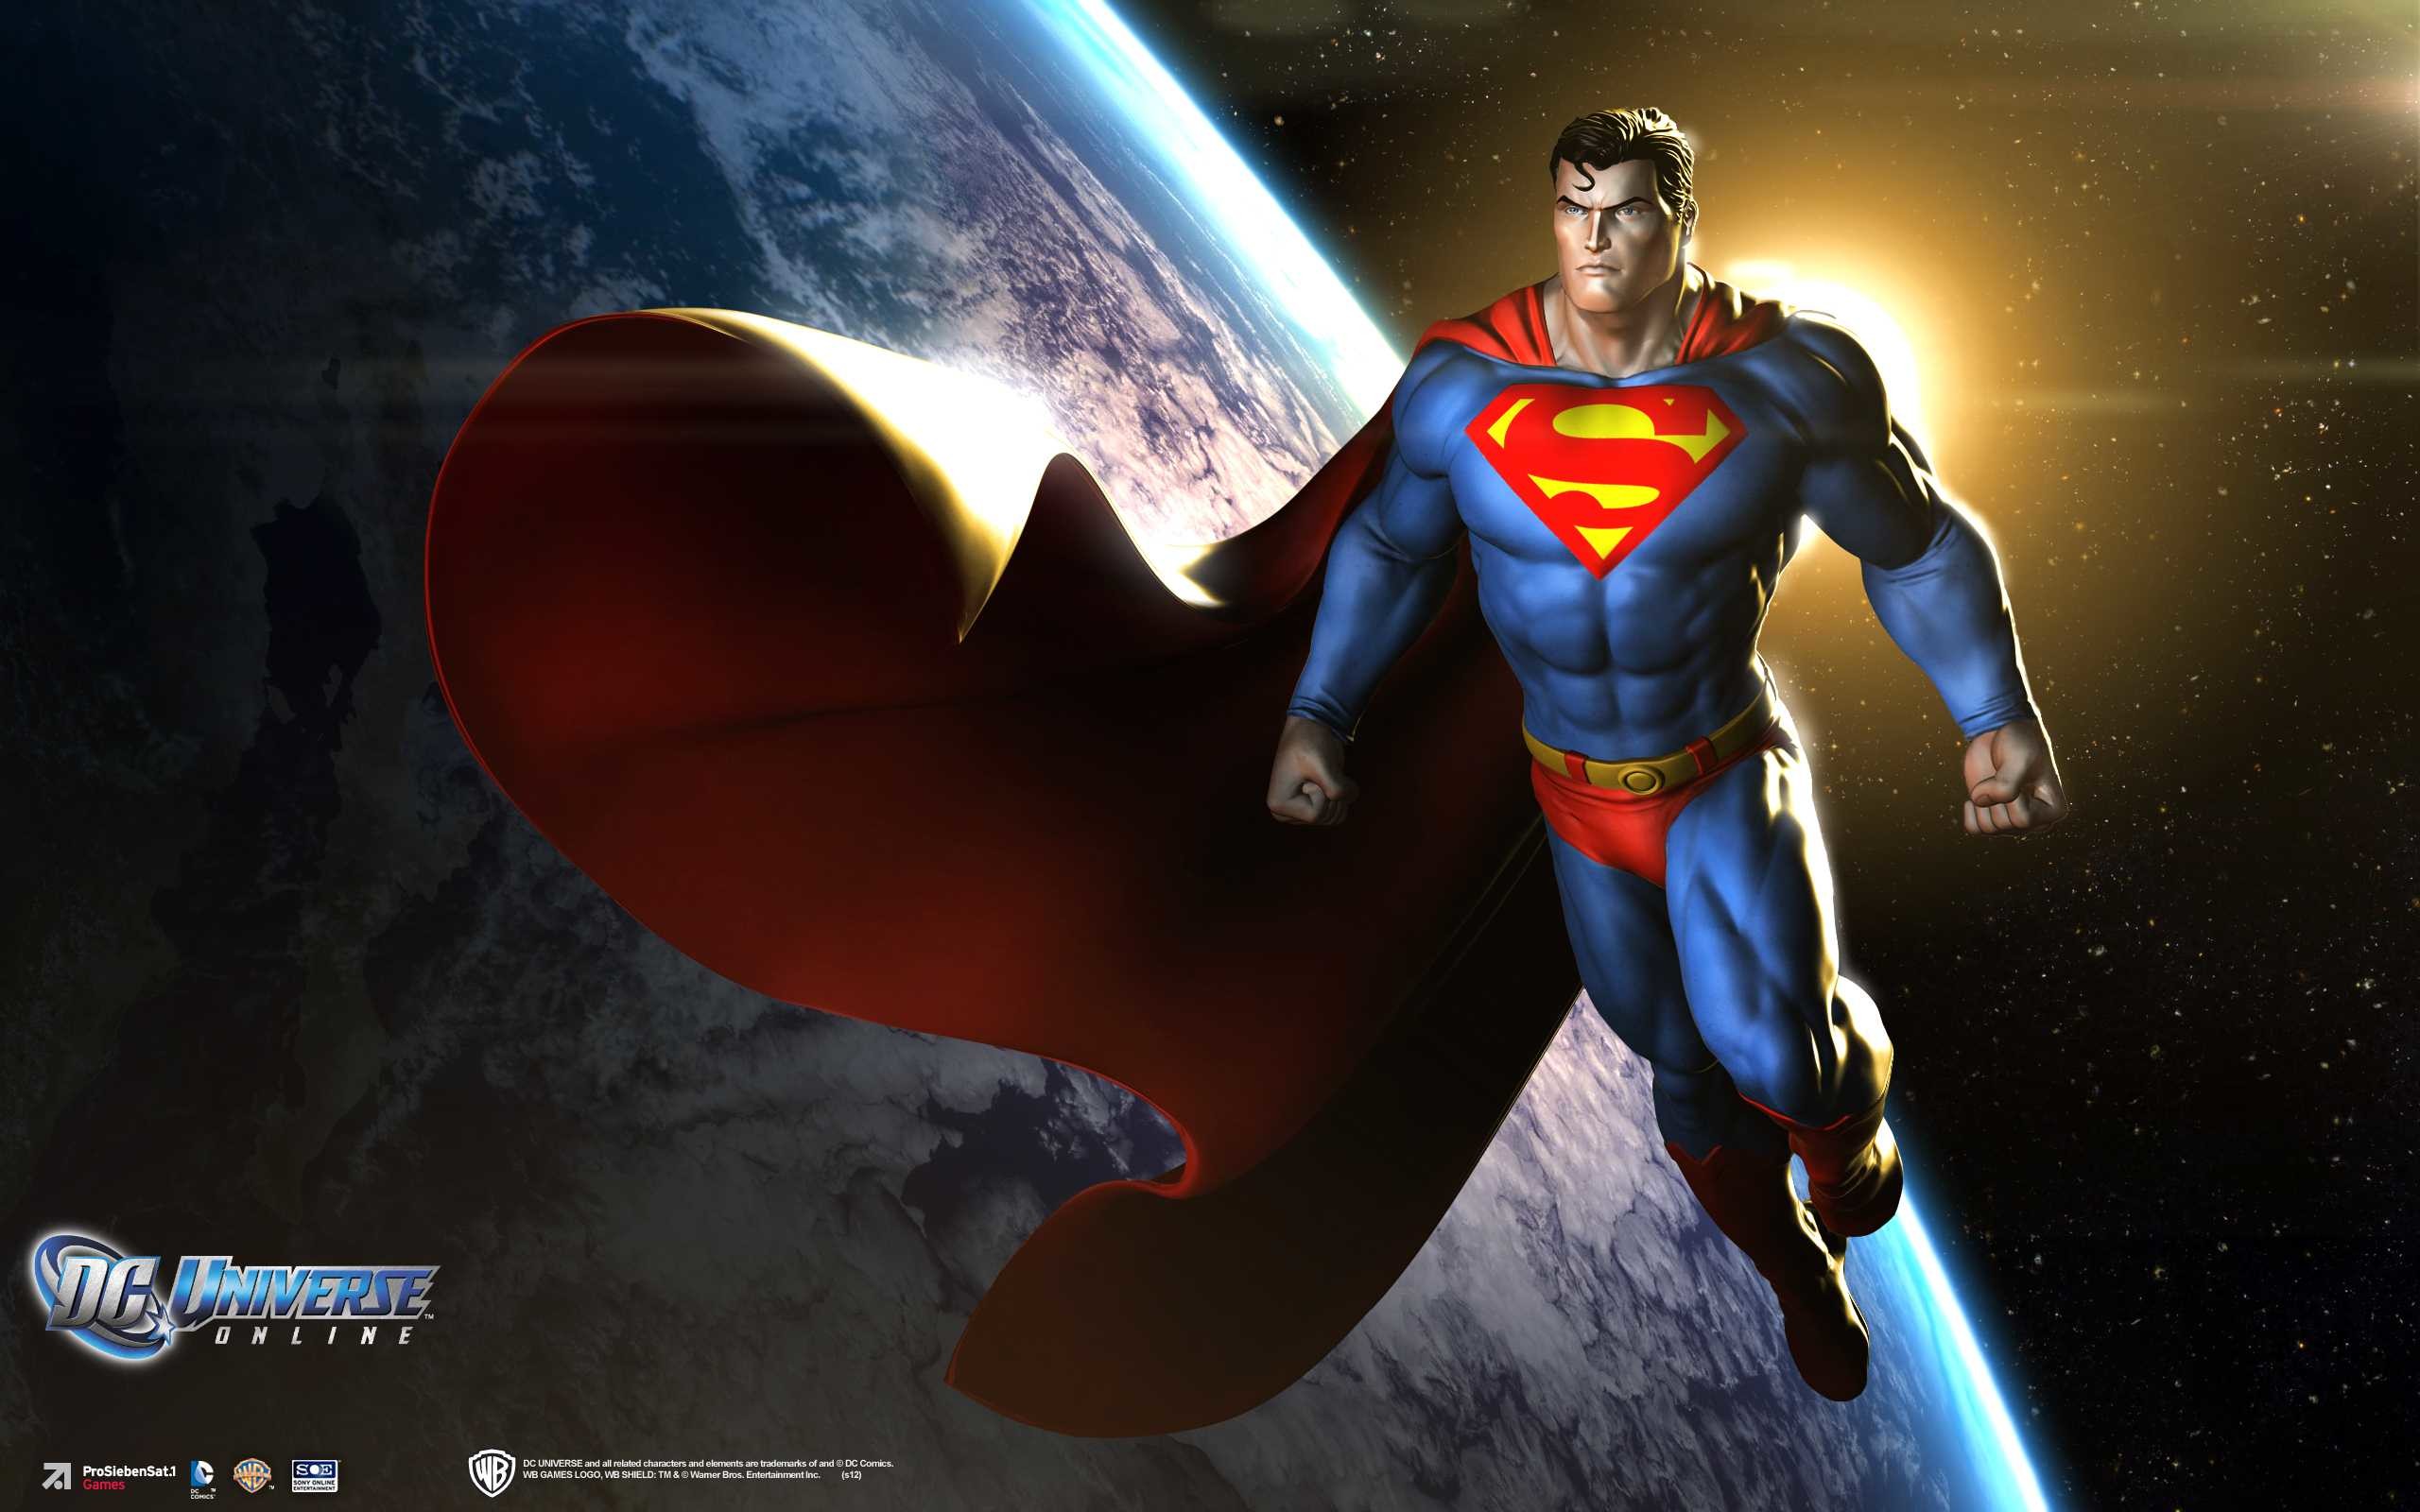 Superman Wallpaper Hd Best Collection For Desktop, - Superman Wallpaper Hd - HD Wallpaper 